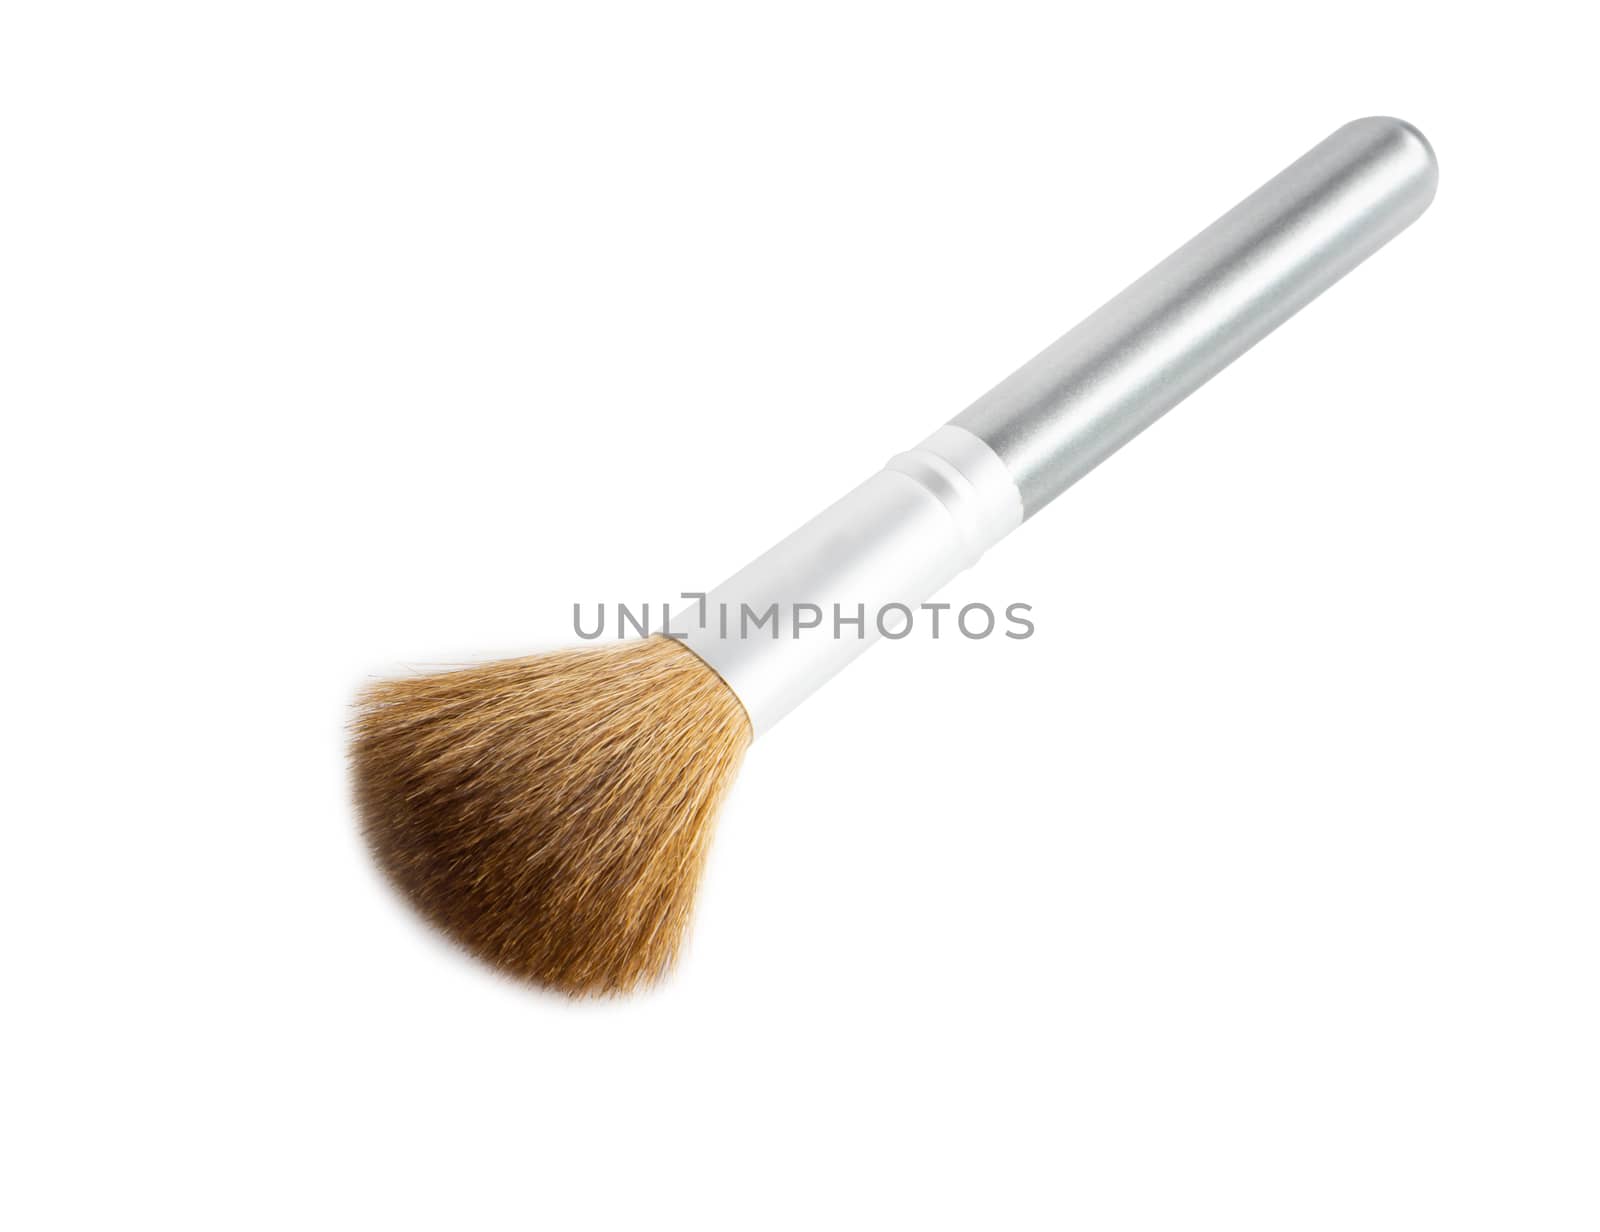 Makeup brush isolated on white background, beauty concept by pt.pongsak@gmail.com